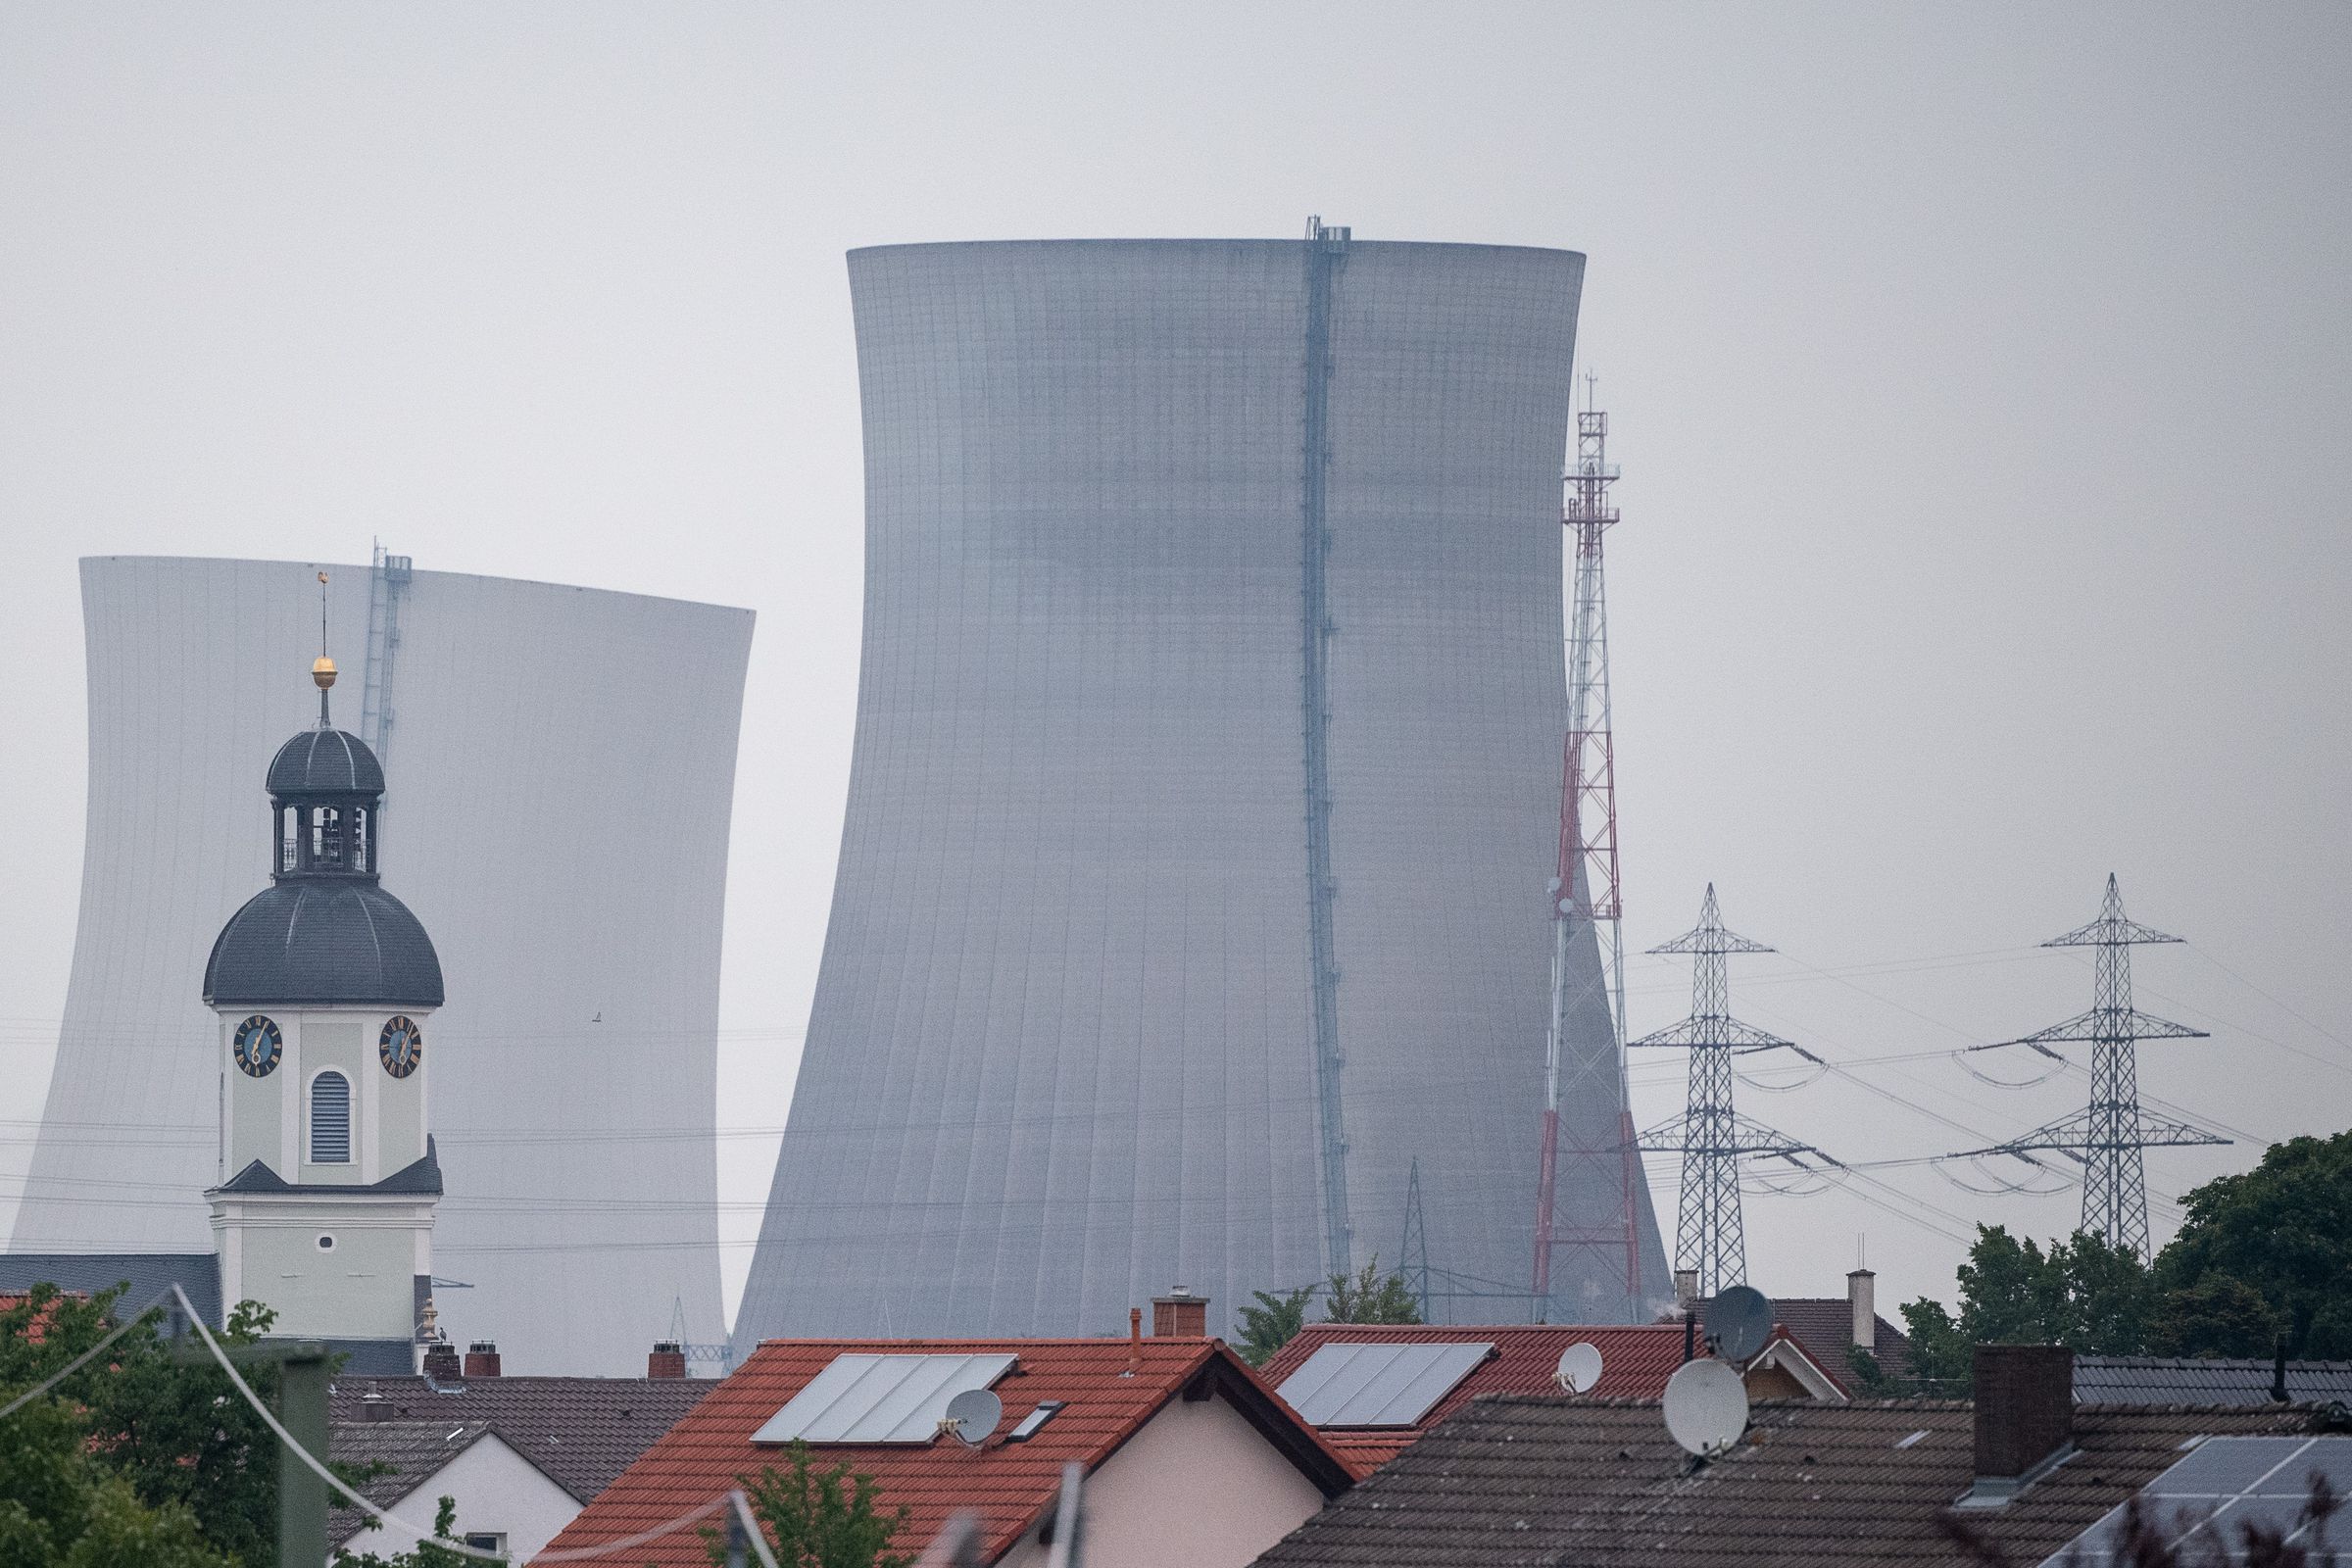 Philippsburg nuclear power plant - blasting the cooling towers